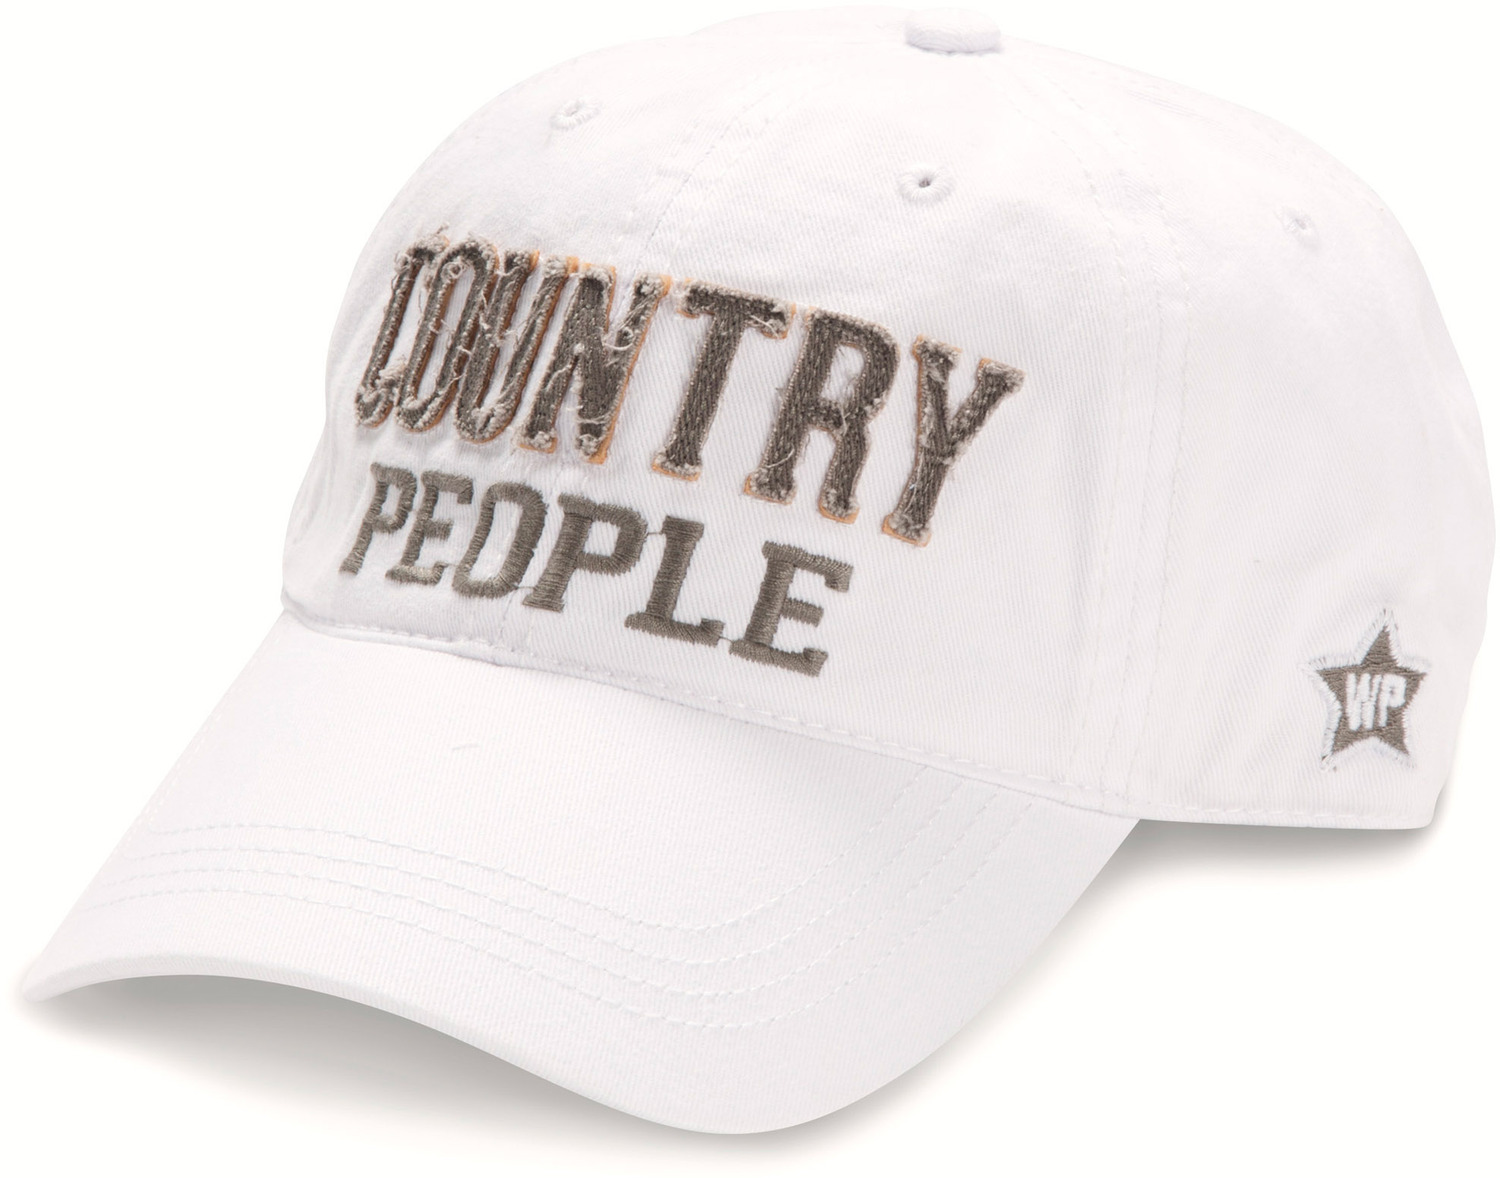 Country People by We People - County People White Snapback Country Hat